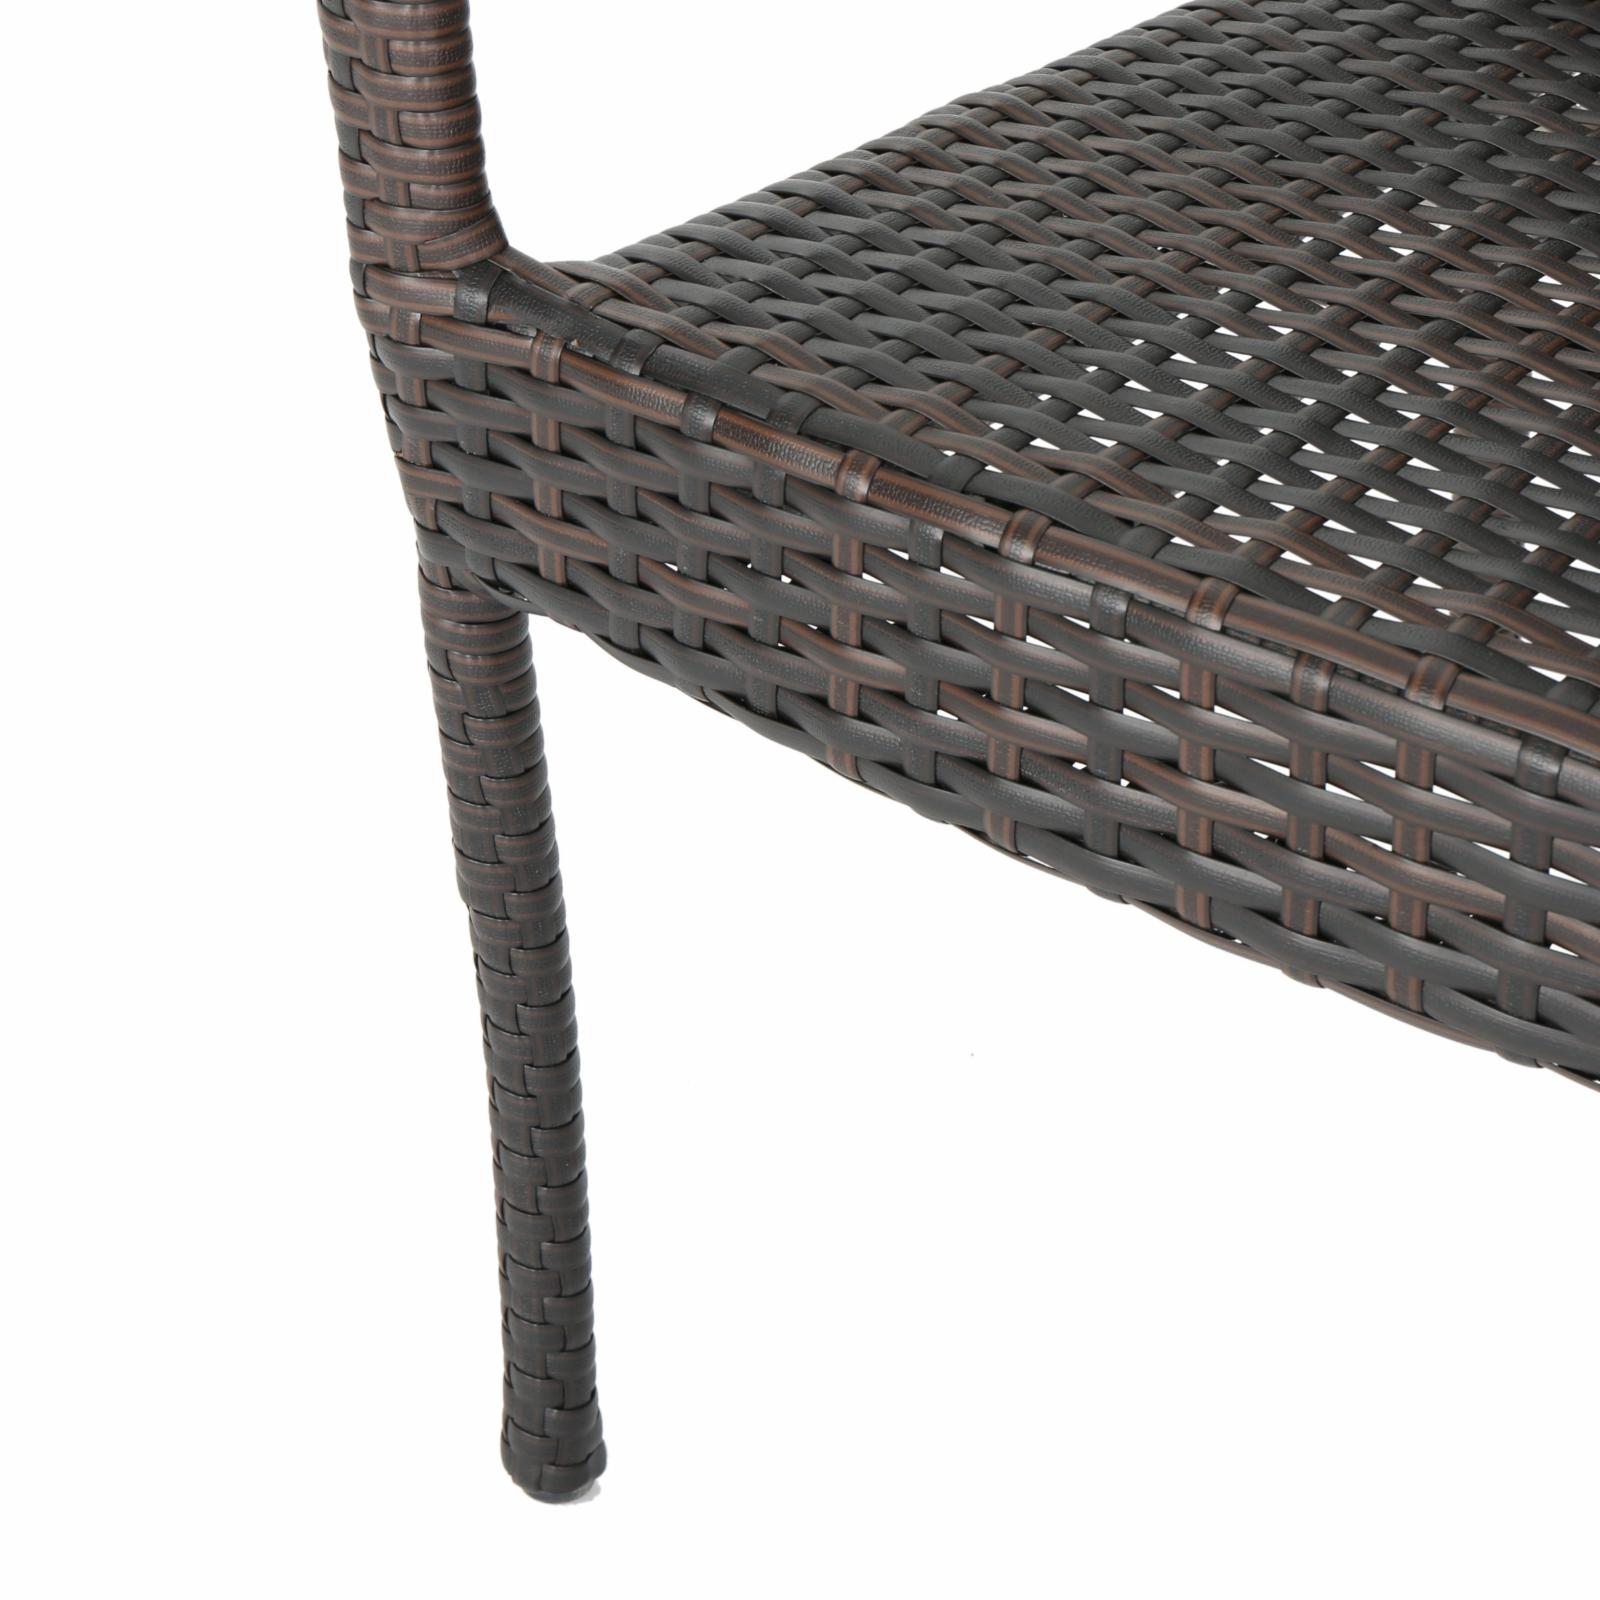 Aniela Outdoor Wicker and Glass 2 Seater Stacking Chair Chat Set - image 4 of 10